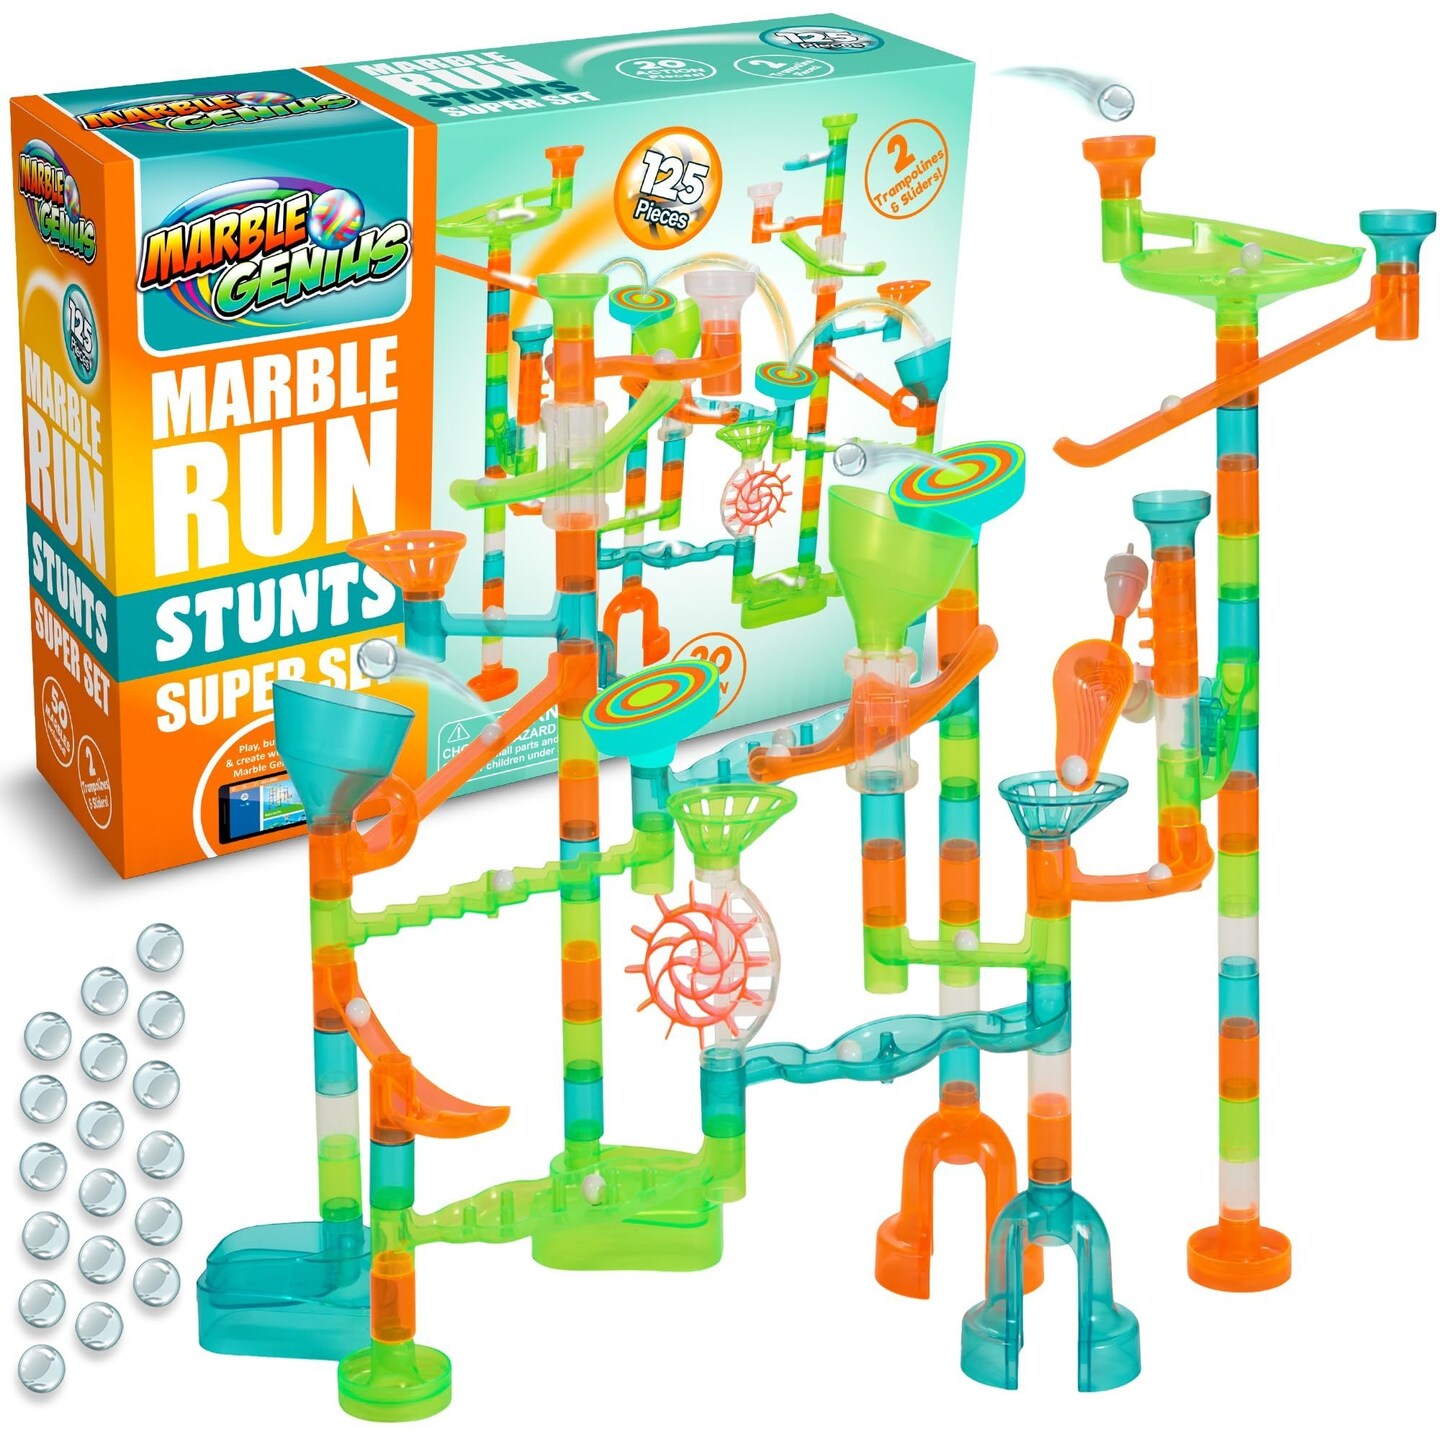 Marble Genius Marble Run Stunts Super Set: 125 Pieces Total, 20 Action Pieces Including 2 New Trampolines, Free Online App and Full-Color Instruction Booklet, Made for Ages 5 and Up